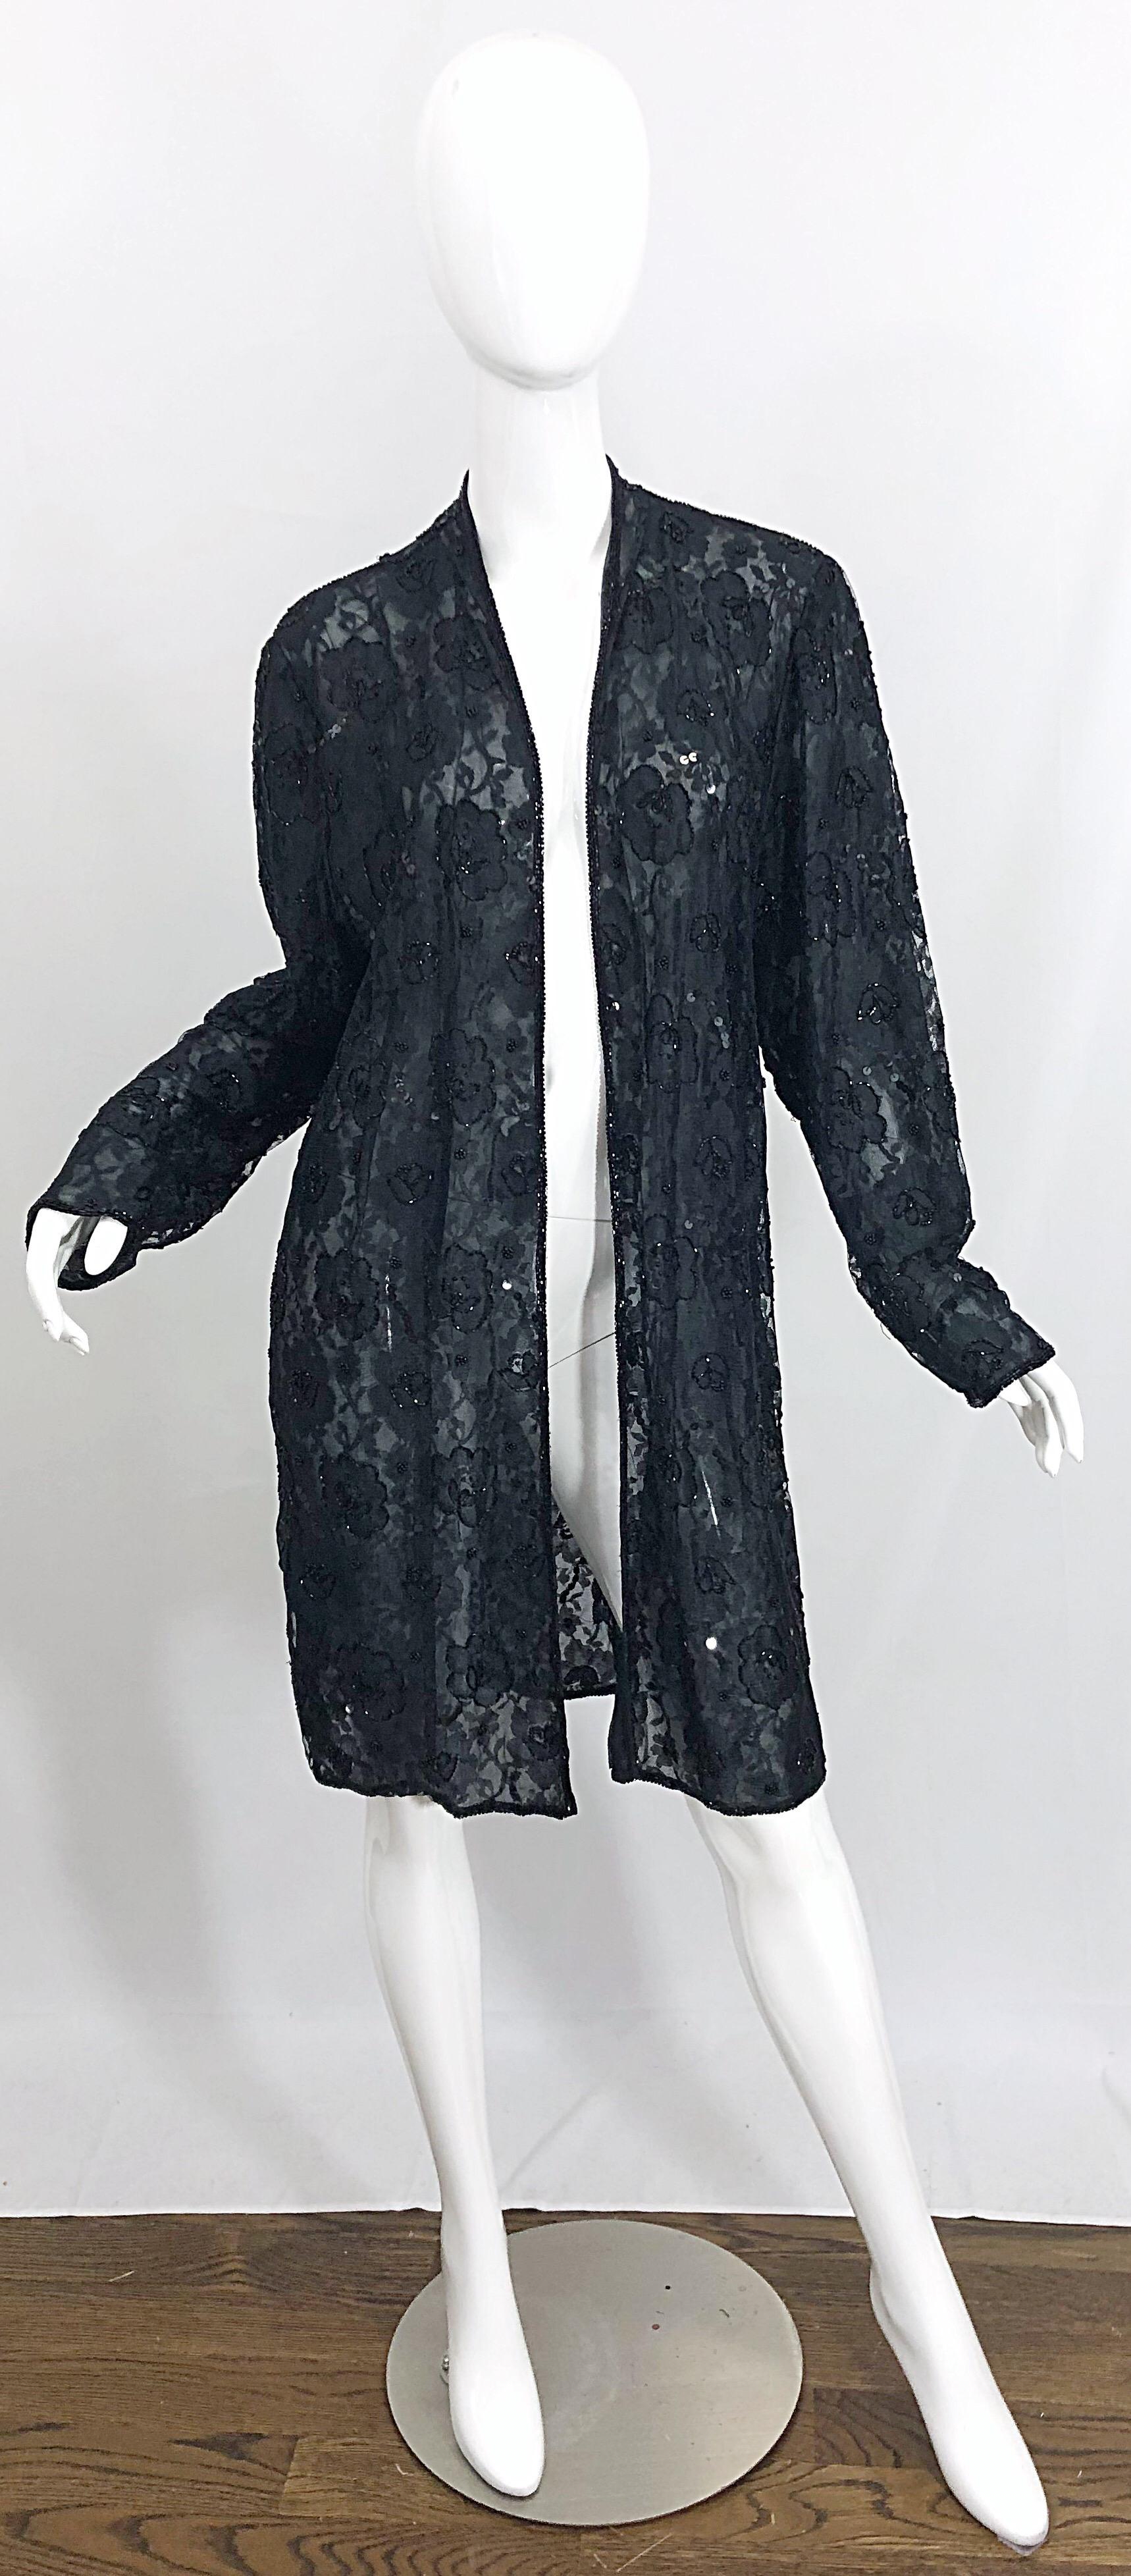 The perfect finishing piece! Beautiful vintage JUDITH ANN black rayon lace beaded sheer duster jacket / cardigan! Features a double-ply black sheer lace. Thousands of hand-sewn beads throughout. Great layering piece that can easily be dressed up or